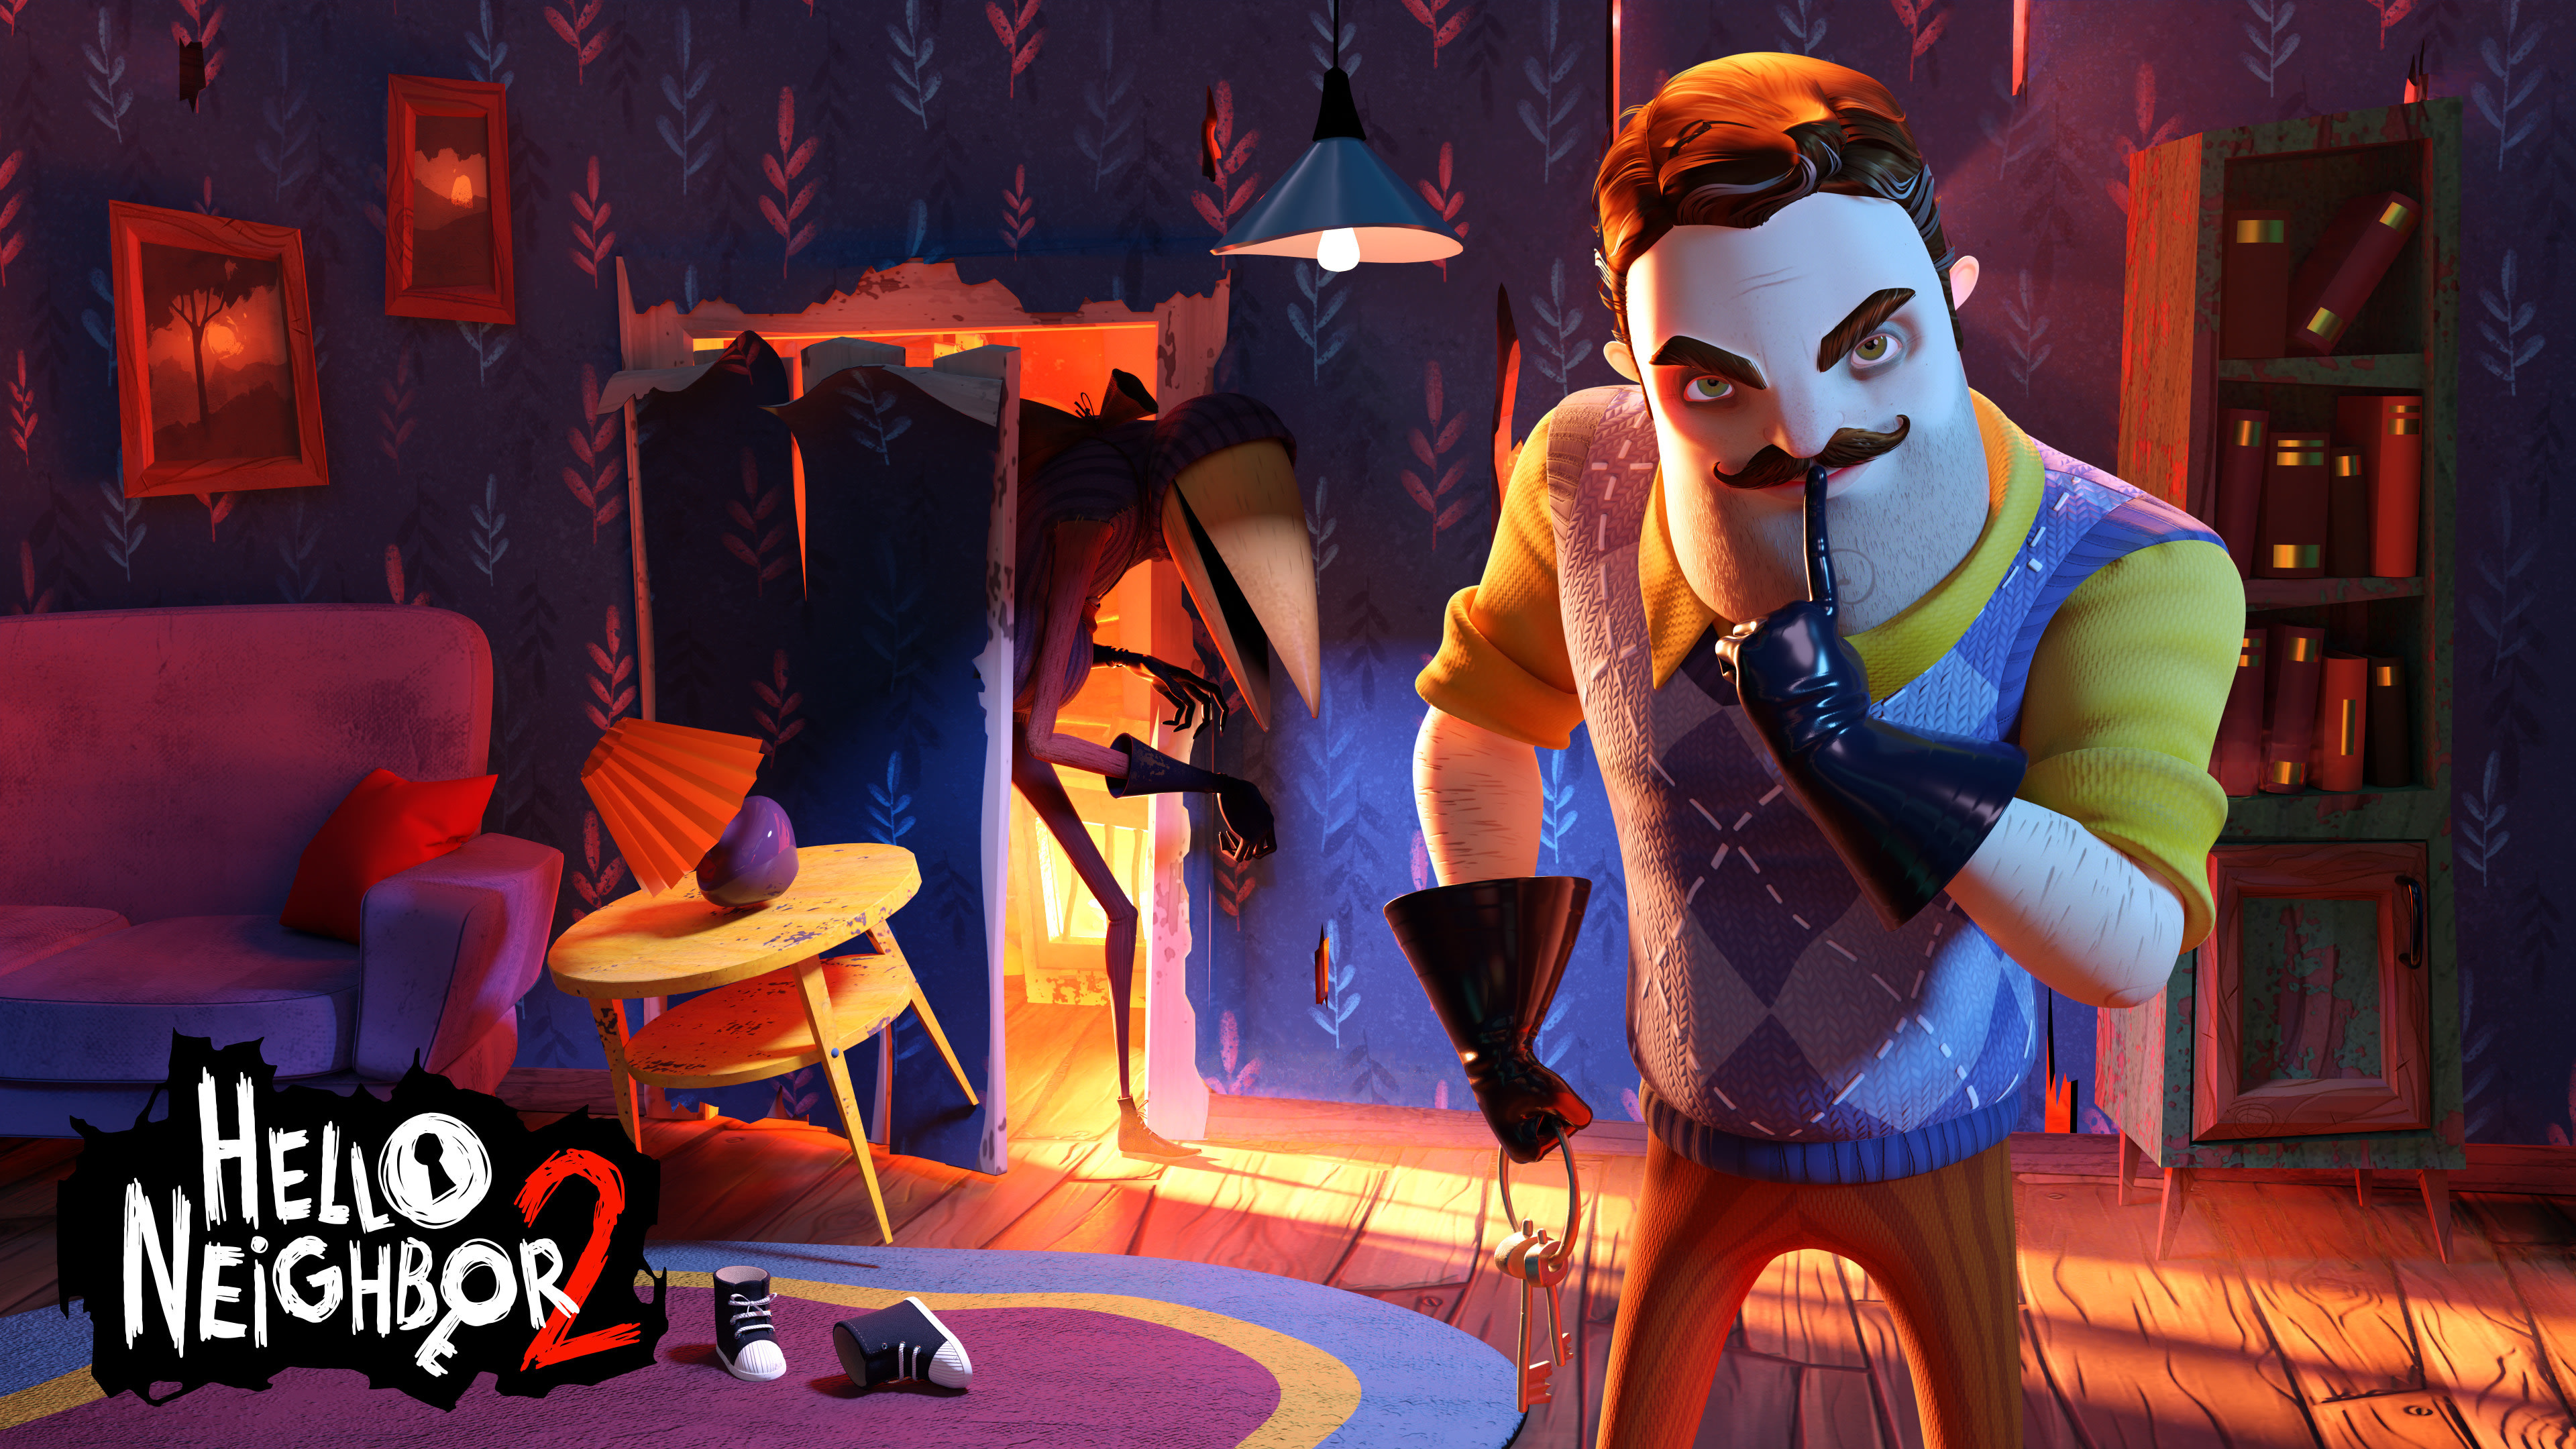 Hello Neighbor 2 (Game): The sequel to the smash hit Hello Neighbor, Formerly Hello Guest. 3840x2160 4K Wallpaper.